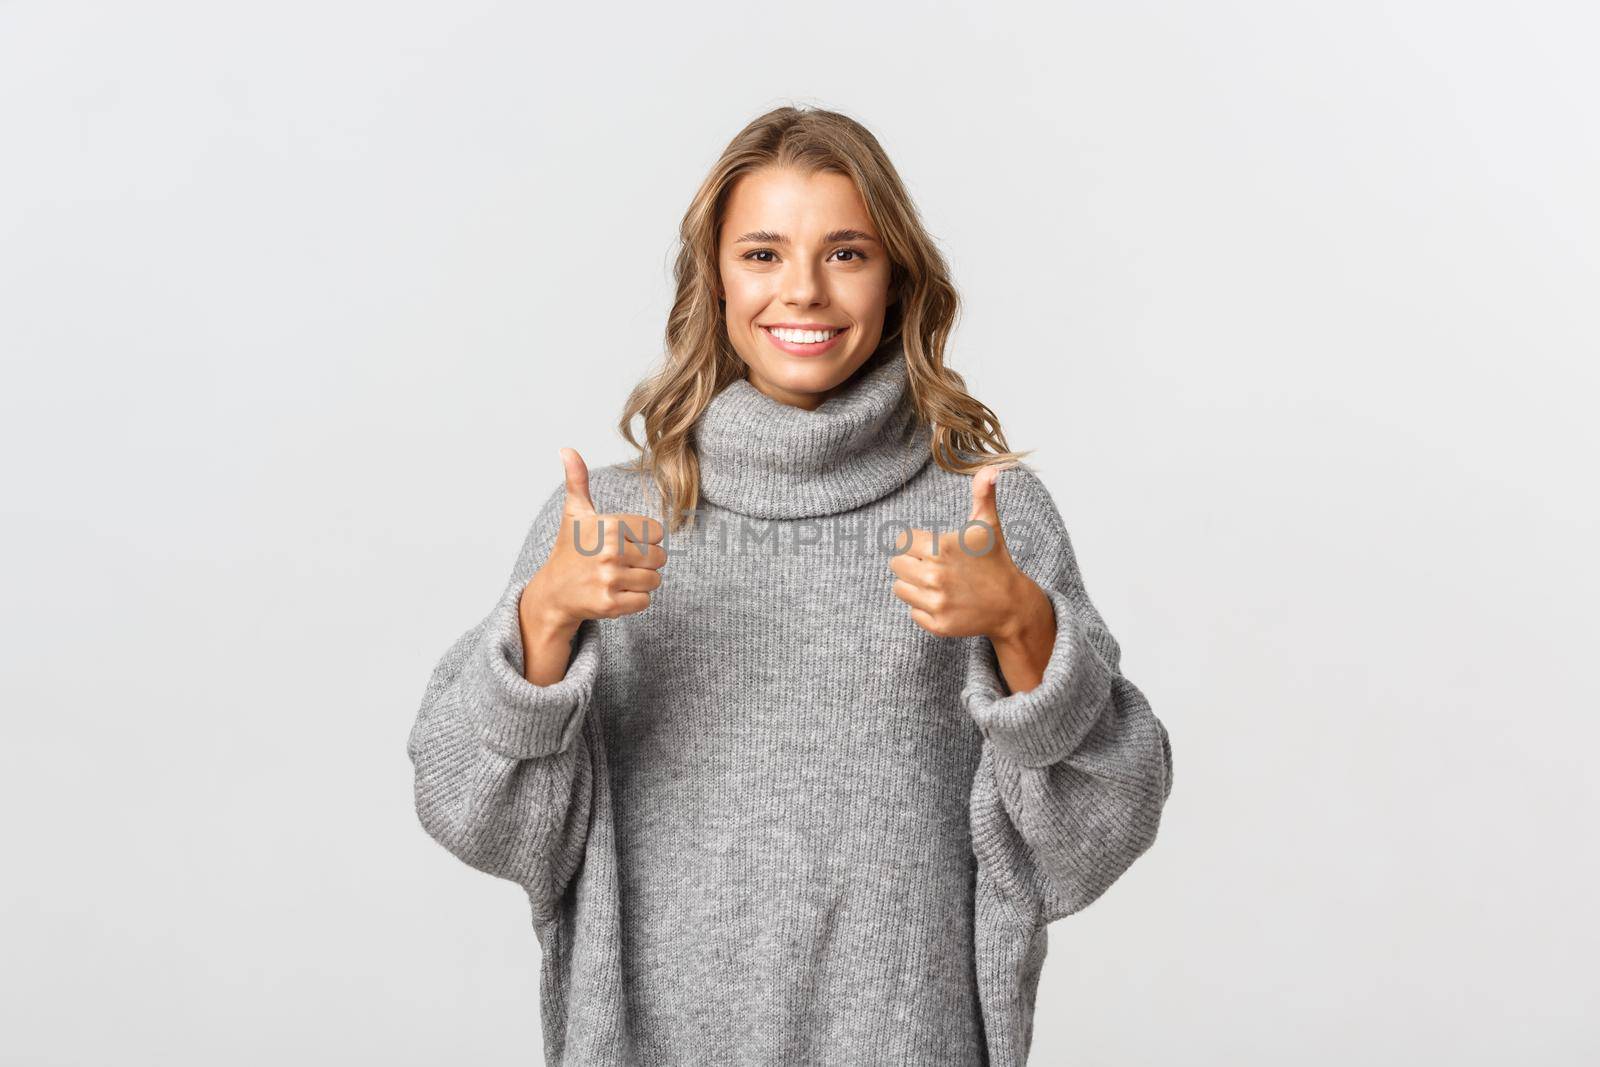 Young supportive woman with blond short hair, showing thumbs-up and smiling, like something or give approval, standing over white background.